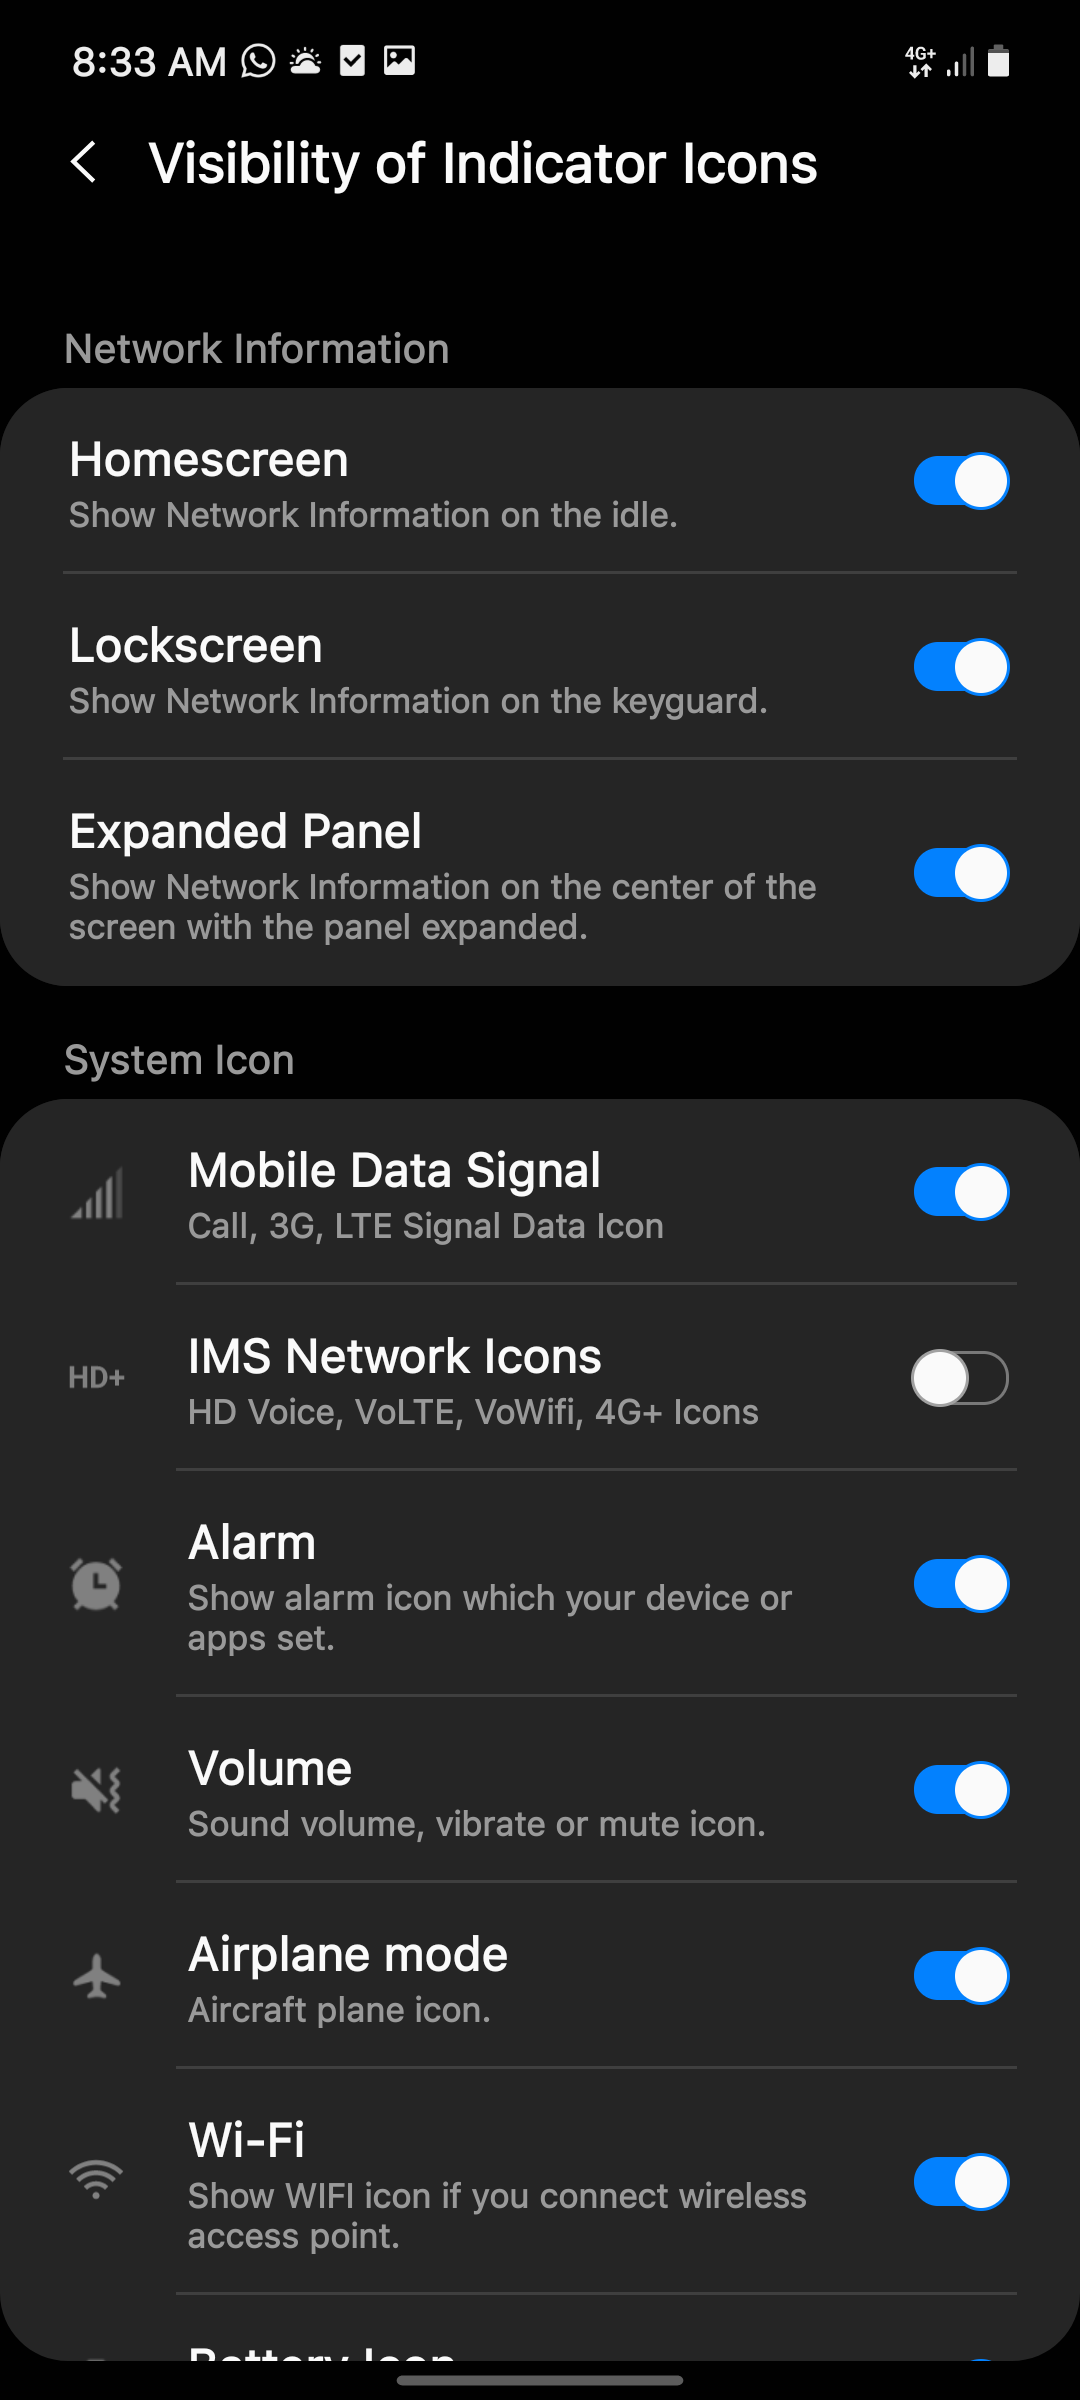 How to remove VoLTE icon? - Samsung Members